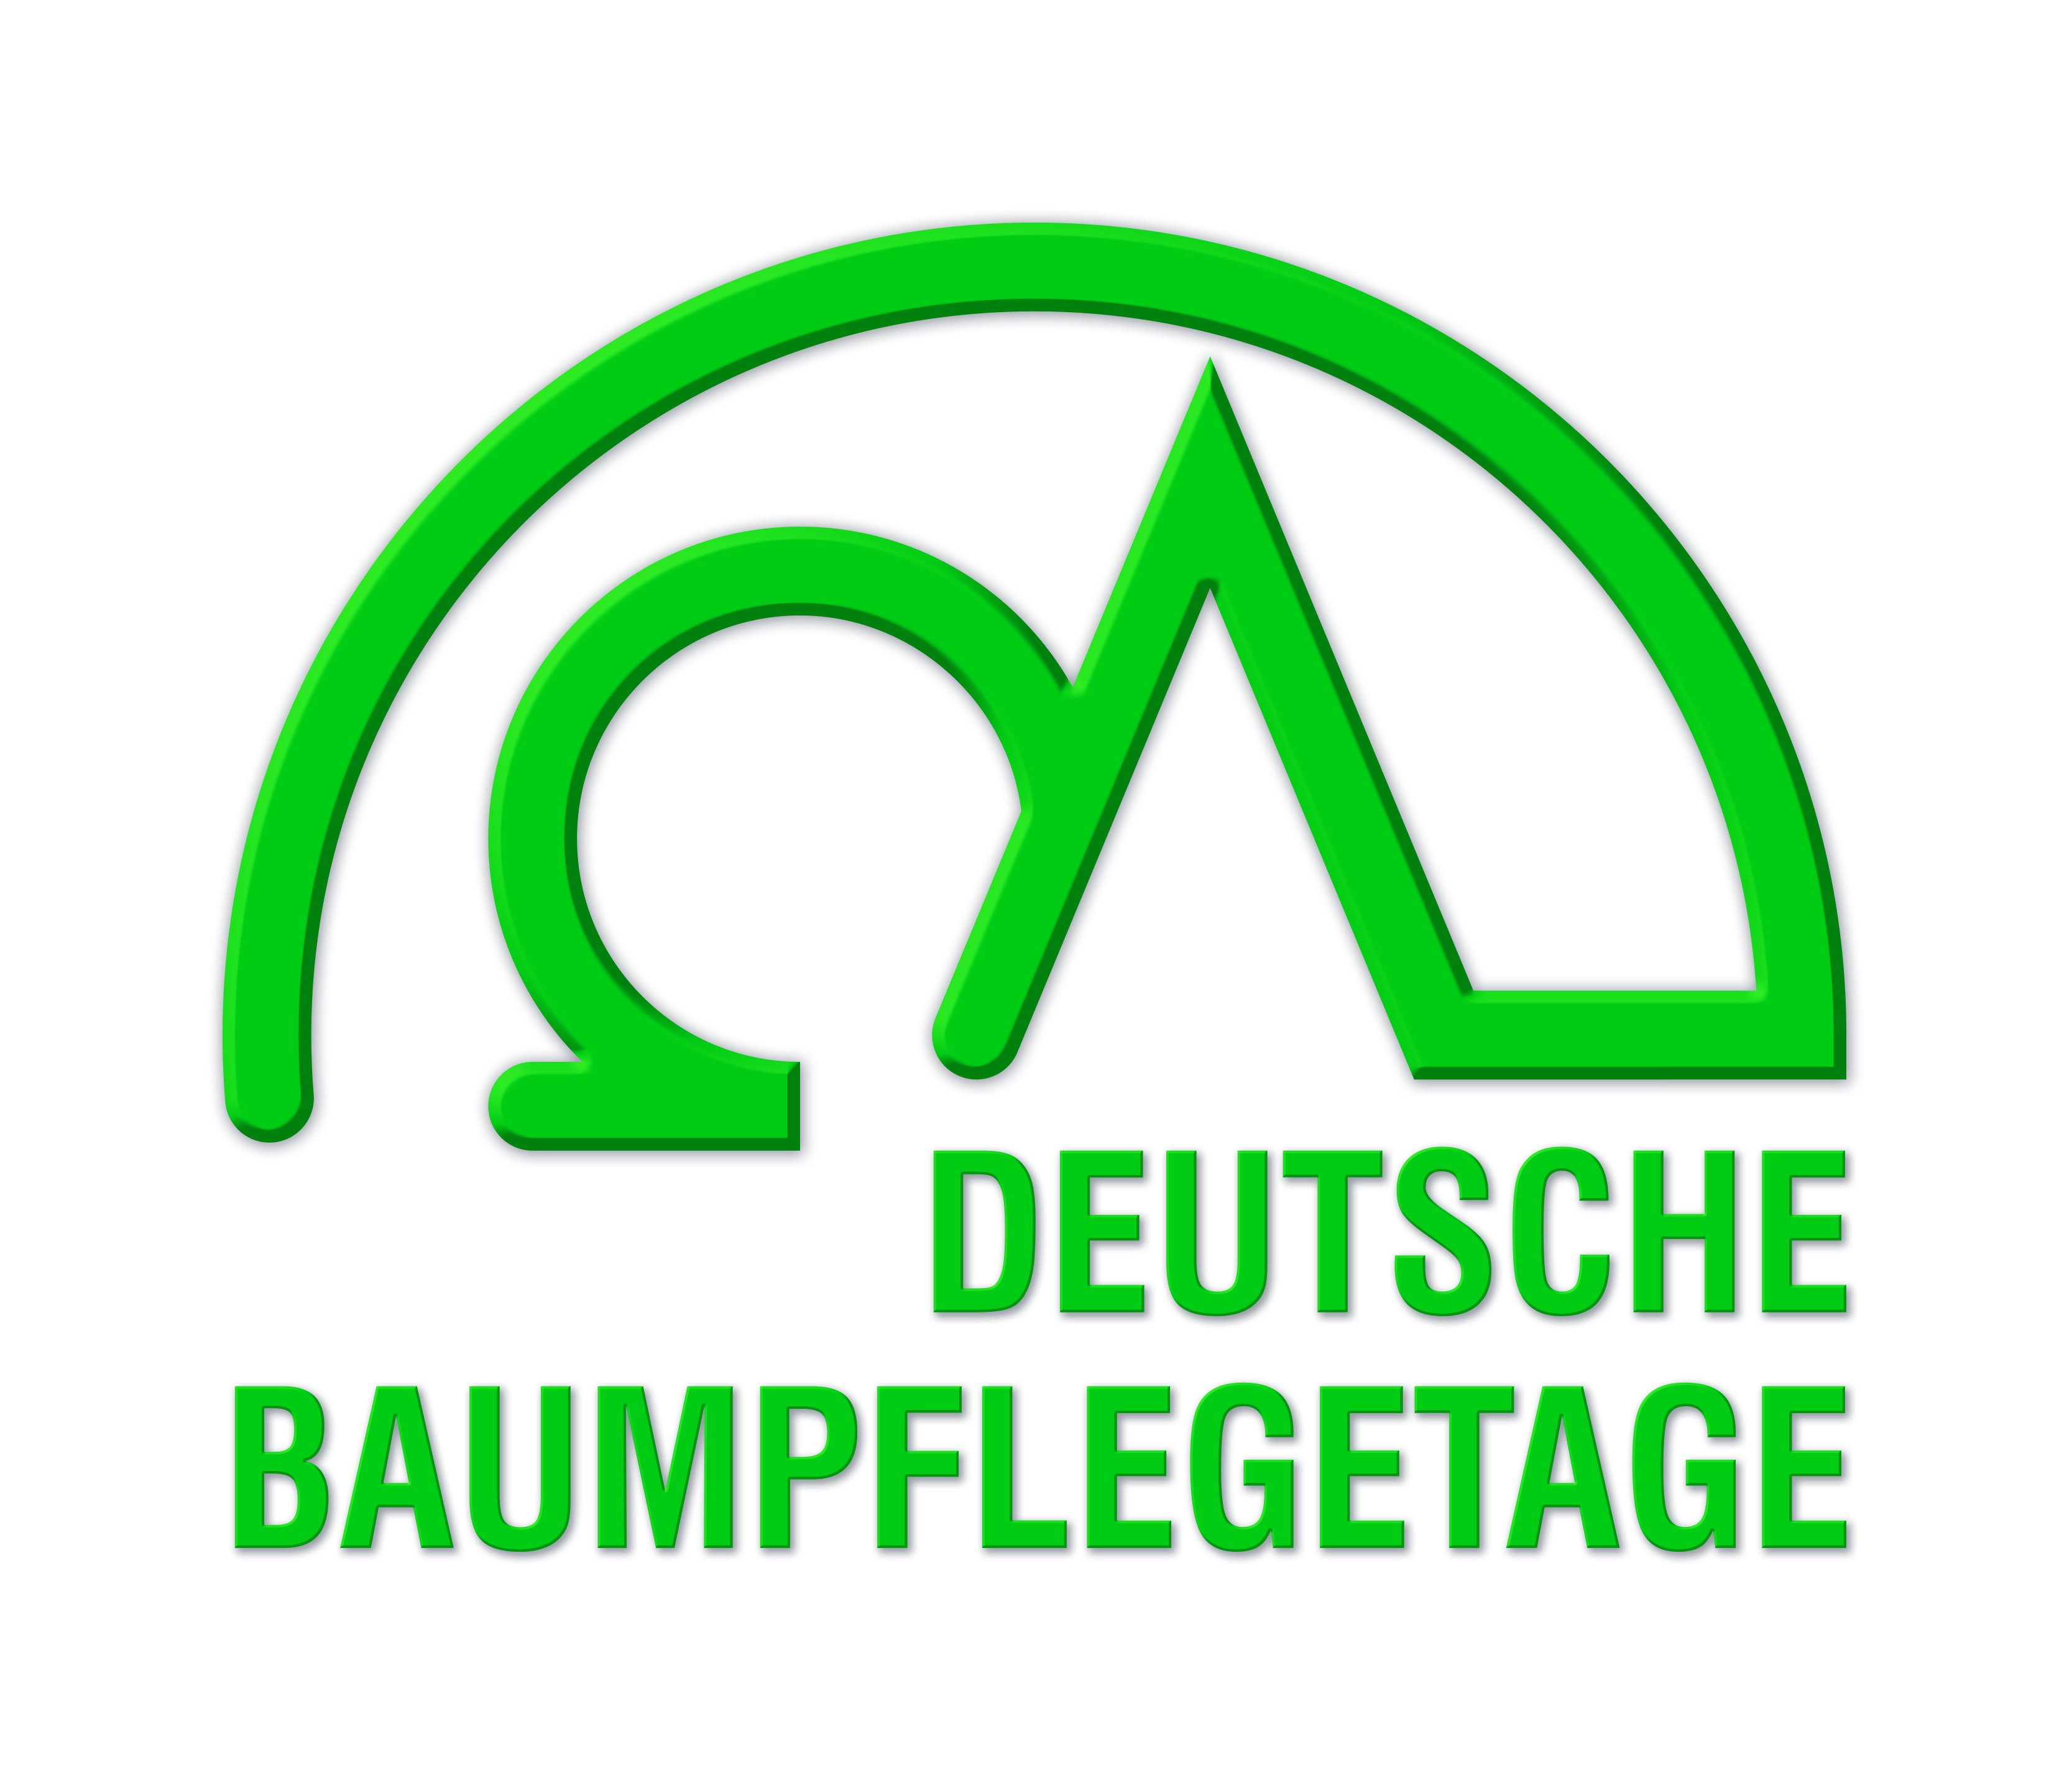 German Tree Care Conference, April 24th to 26th, 2018